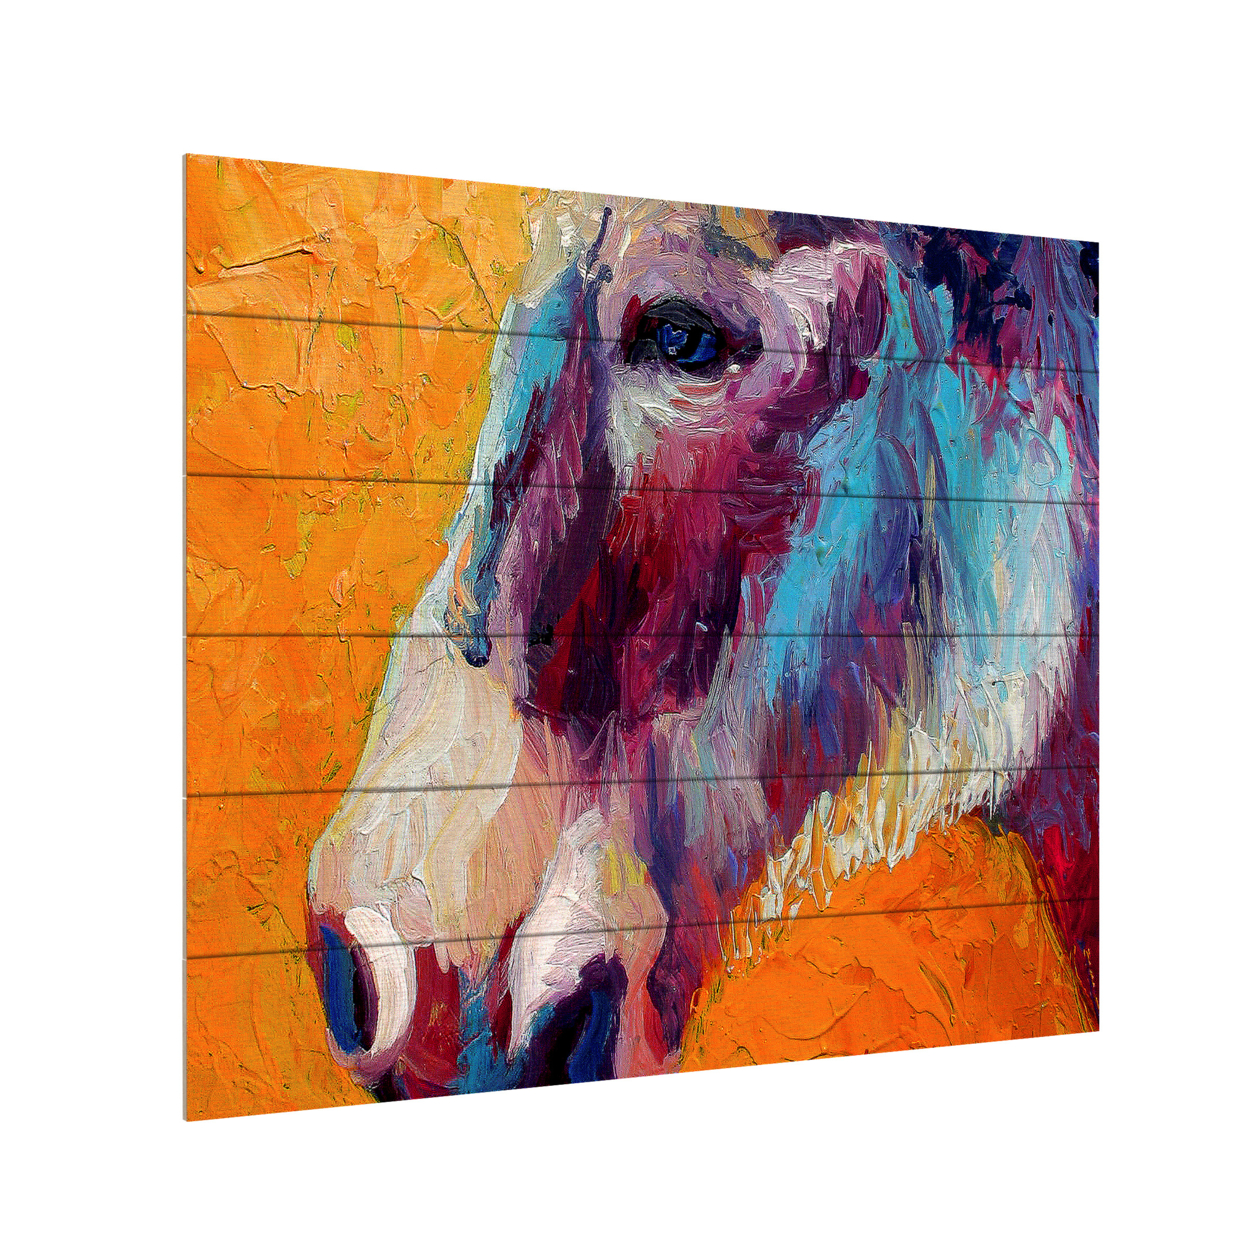 Wooden Slat Art 18 X 22 Inches Titled Burro II 1 Ready To Hang Home Decor Picture